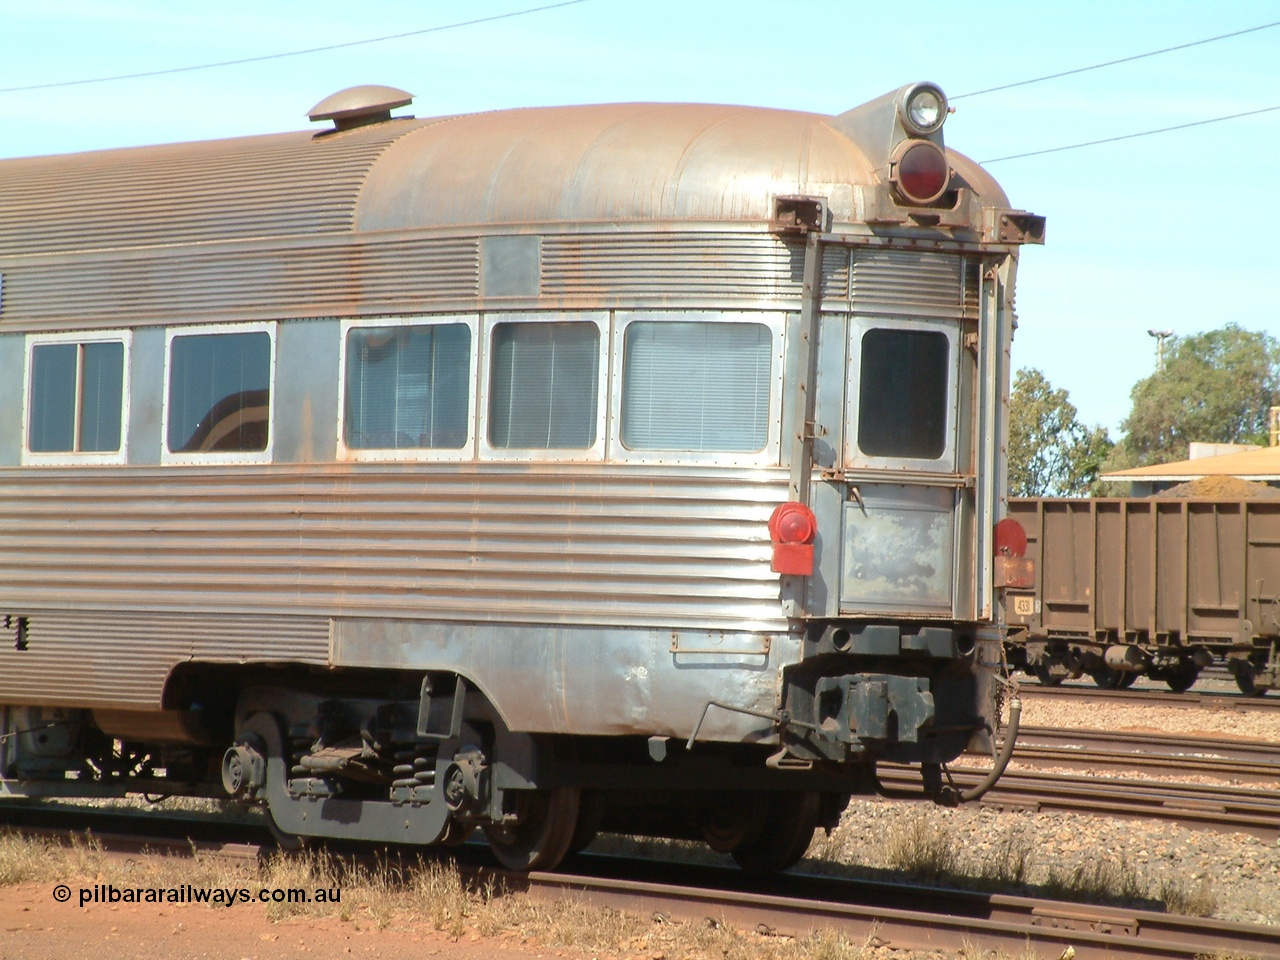 040912 142144
Nelson Point, Silver Star observation coach, 'Sundowner', 3/4 view of rear end, shows lighting arrangement, end of train markers. Originally built by E. G. Budd in 1939 numbered 301 as the Silver Star as a diner-parlour-observation coach on the Chicago, Burlington and Quincy Railroad's General Pershing Zephyr train from the 1930s and 1940s. Donated to Mt Newman Mining Co. by AMAX an original joint venture partner to commemorate the projects first 100 million tonnes of iron ore railed between Mount Whaleback mine and the Port Hedland port.
Keywords: Silver-Star;EG-Budd;Sundowner;General-Pershing-Zephyr;301;